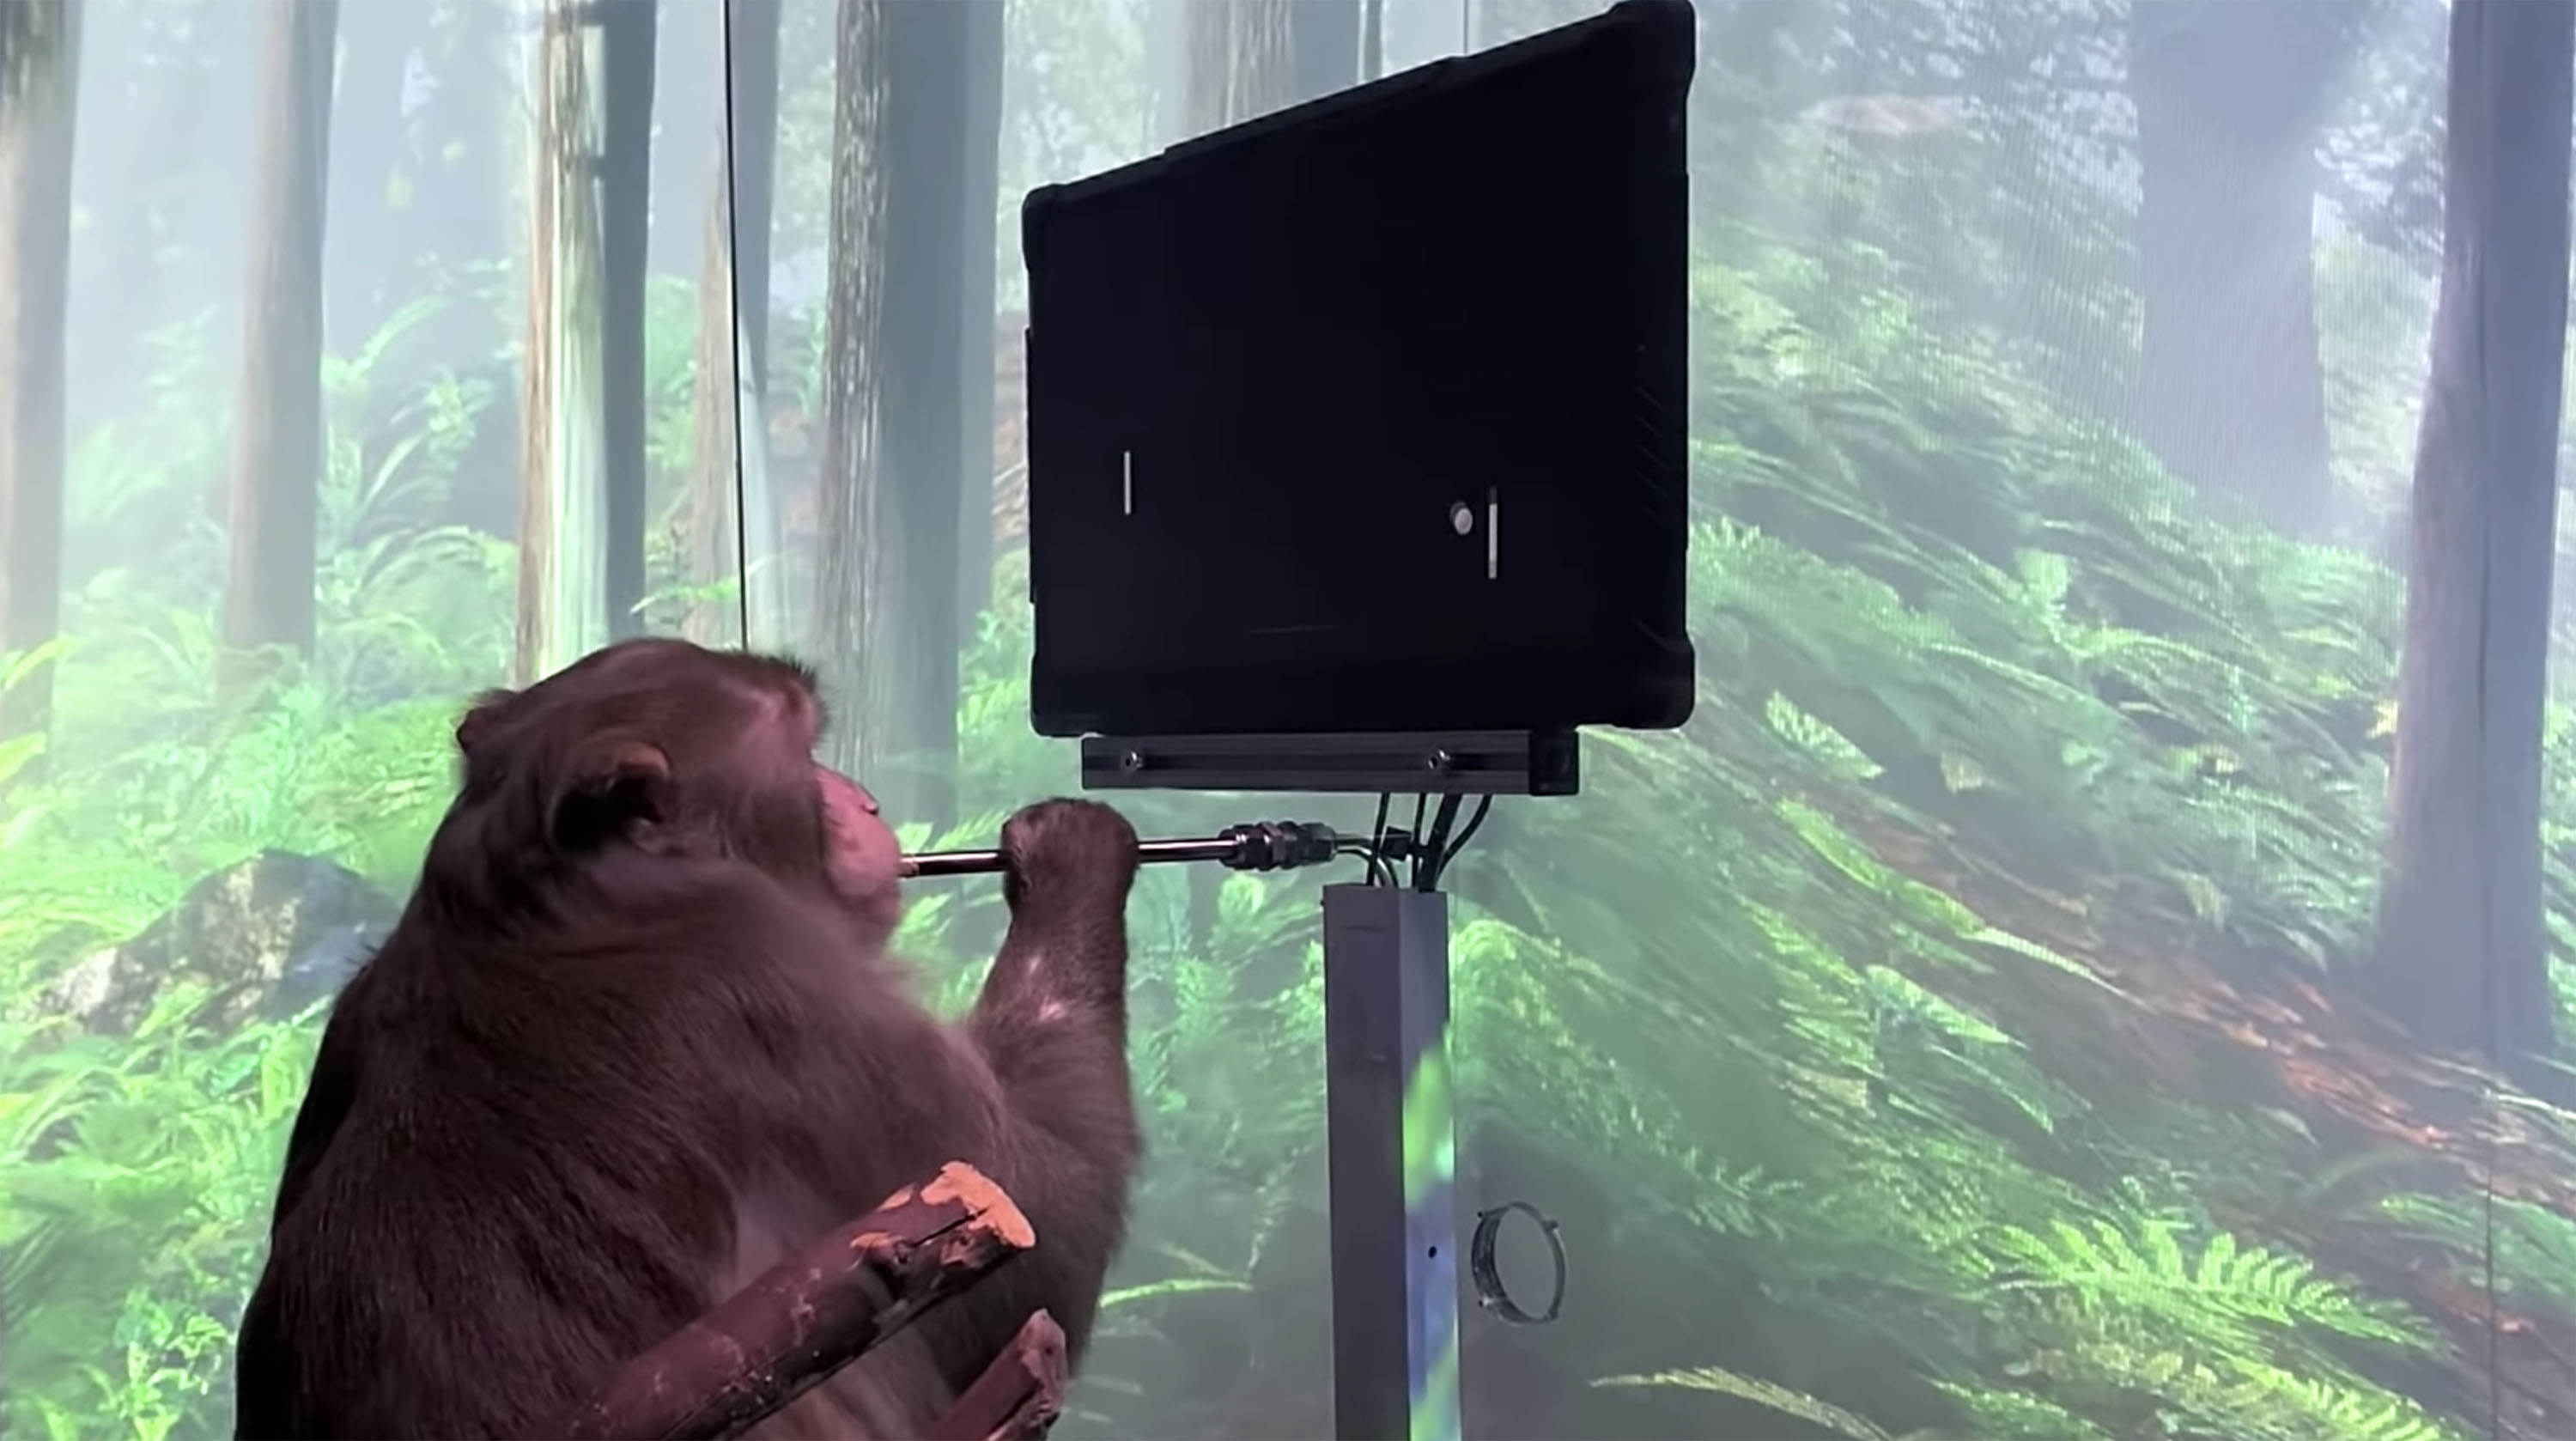 Elon Musk’s Neuralink claims monkeys can play Pong using just their